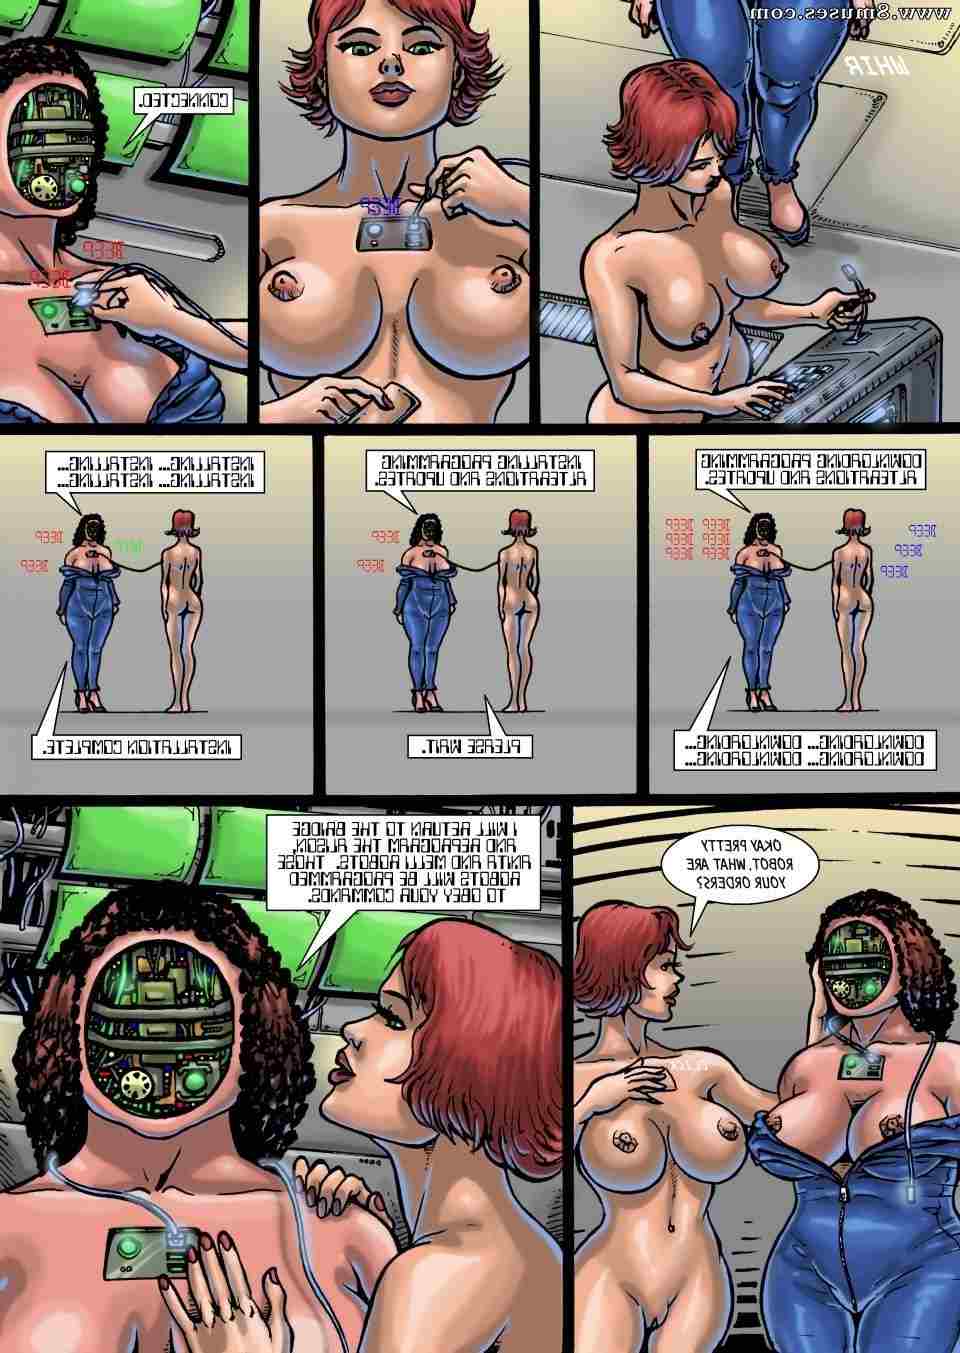 Various-Authors/Predator/Sex-Droids-in-Space Sex_Droids_in_Space__8muses_-_Sex_and_Porn_Comics_33.jpg